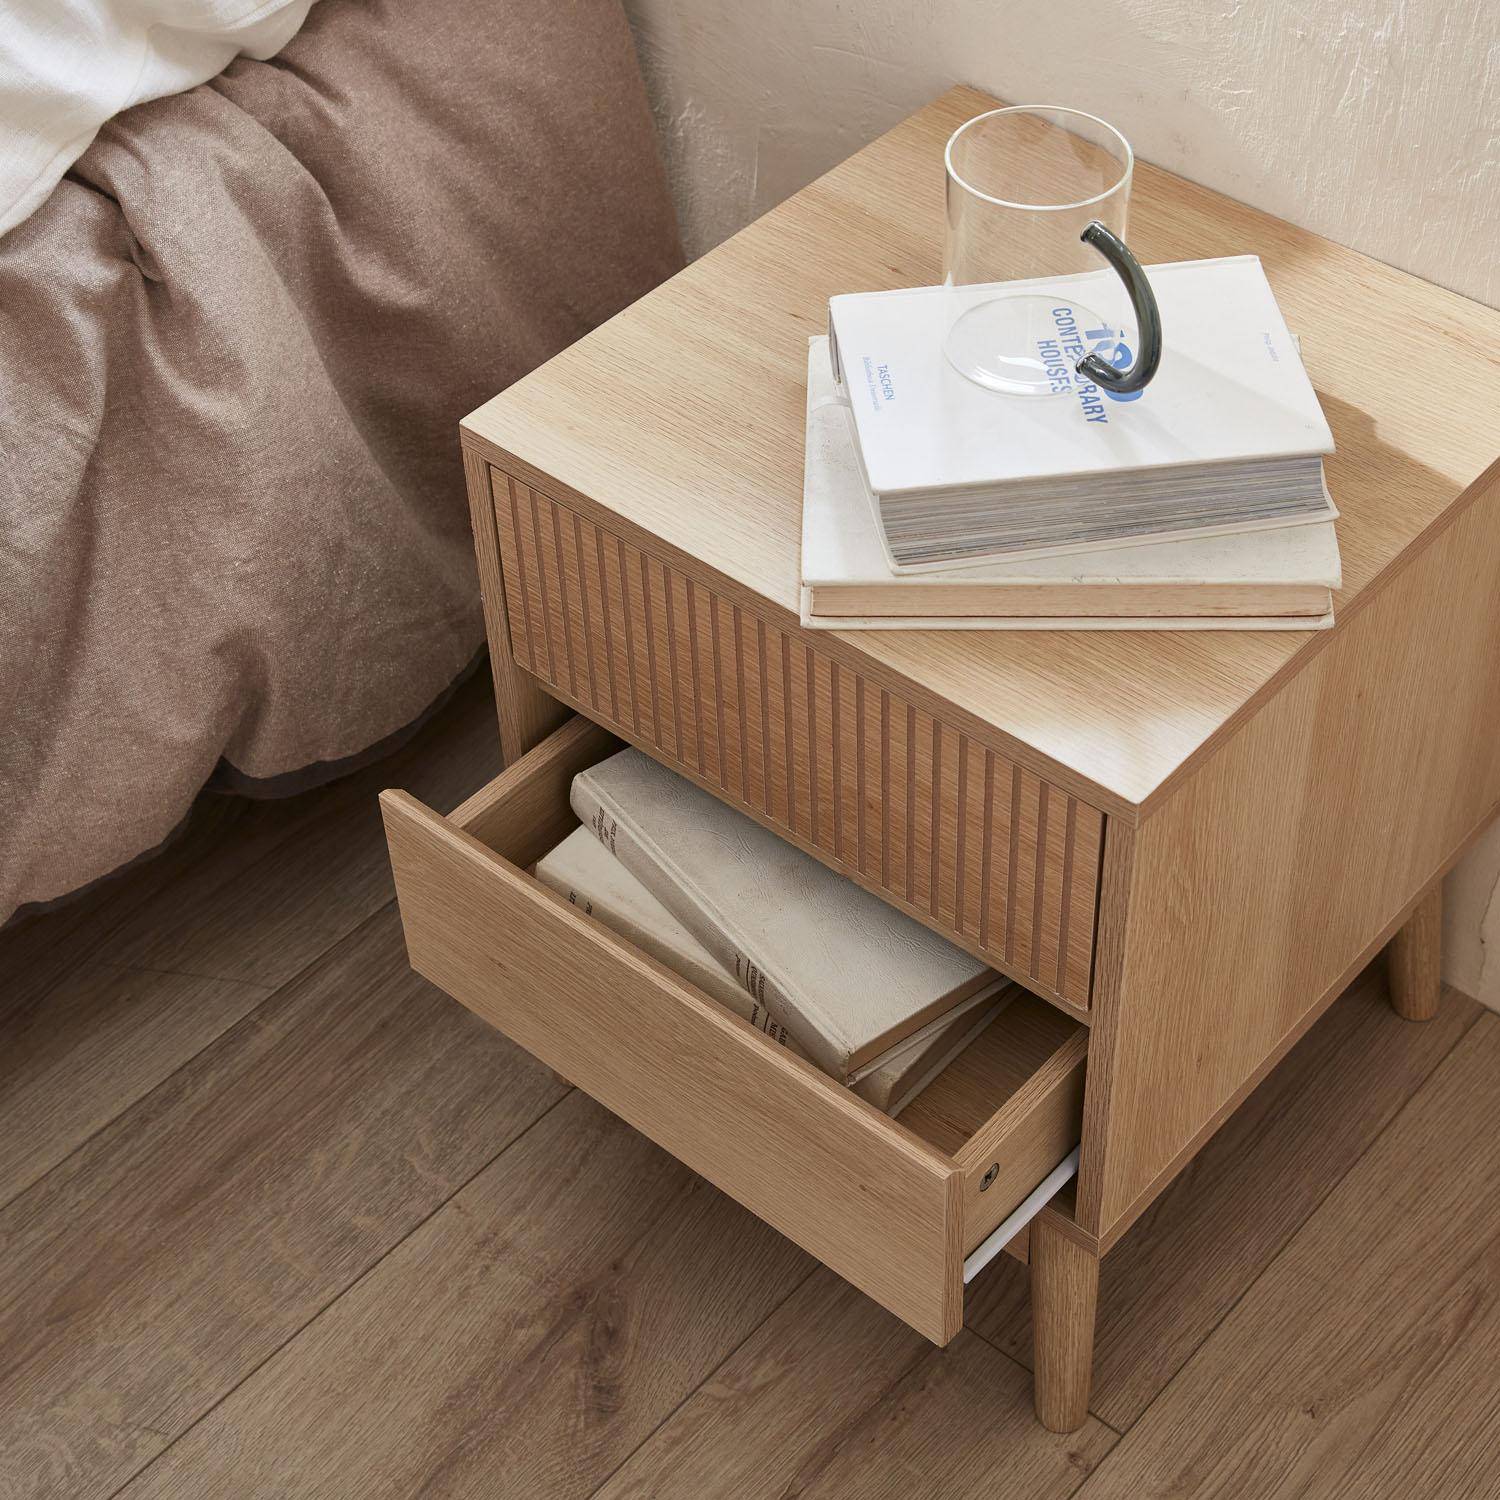 Grooved wooden bedside table with 2 drawers, 40x39x48cm, Linear - Natural Wood colour,sweeek,Photo2